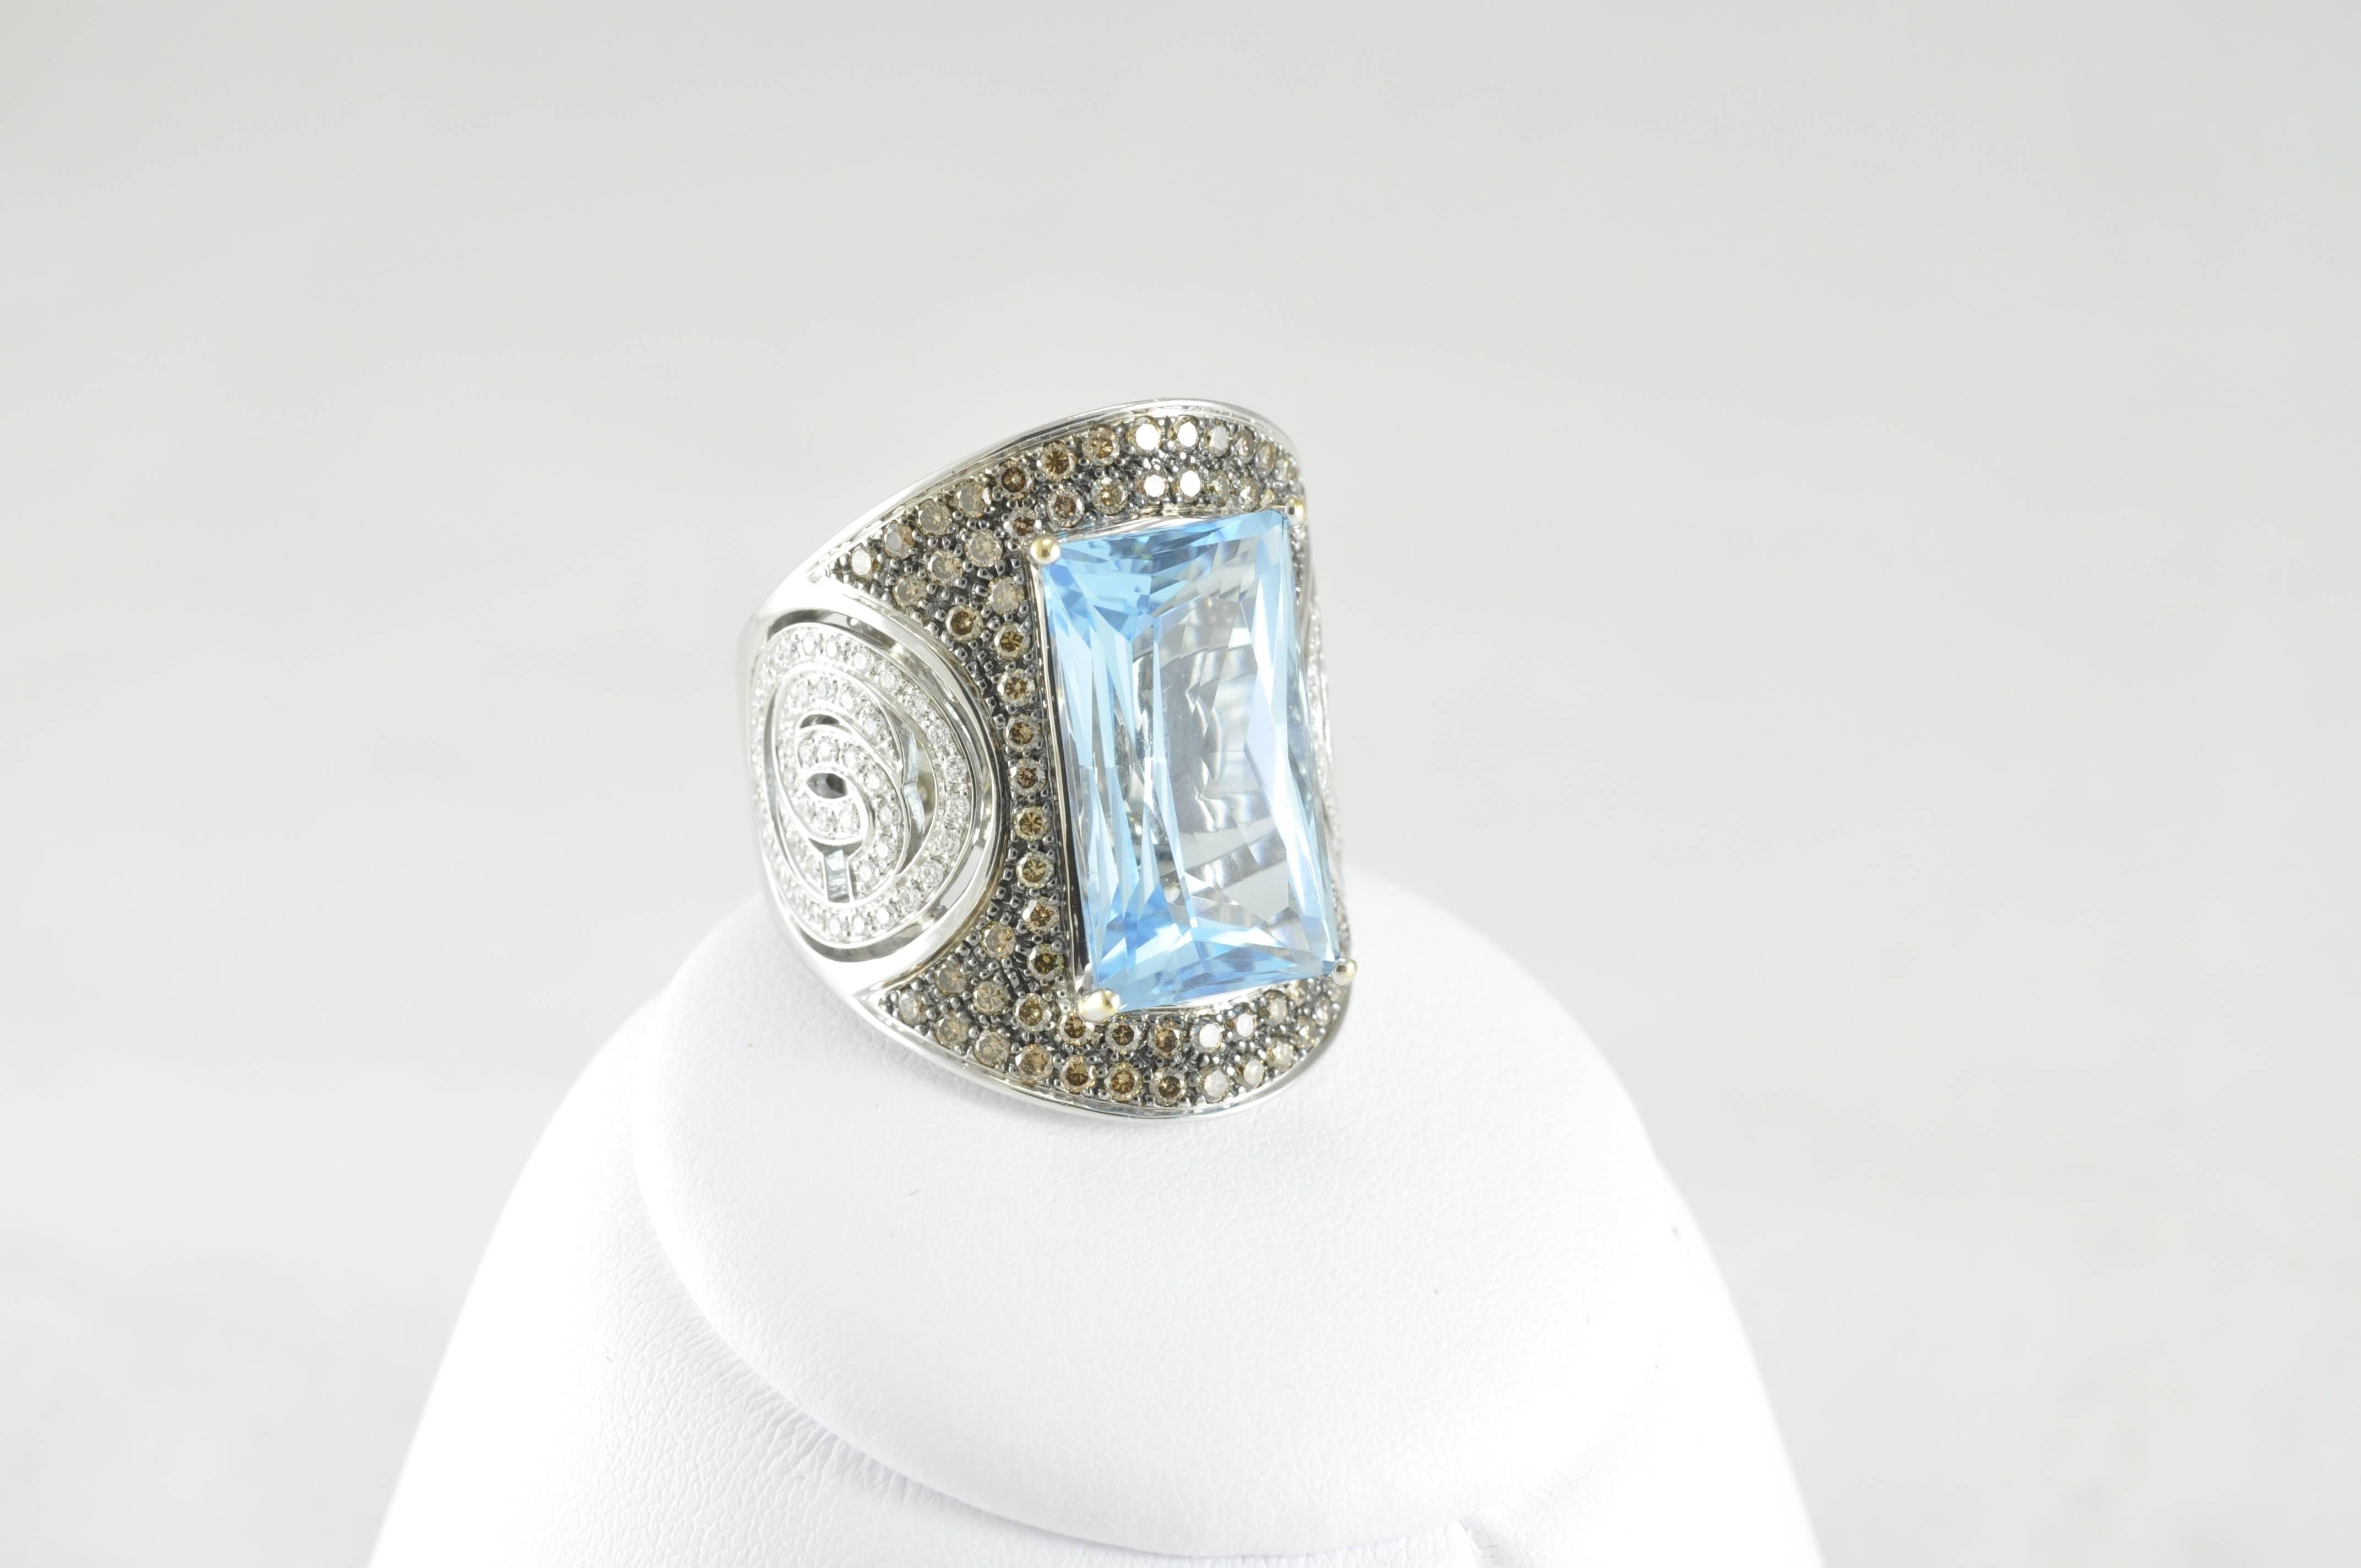 Orianne Collins Bagatelle White Gold, White Diamonds and Blue Topaz Ring.
This ring has 23.90grams of White Gold, 20.80ct. Blue Topaz, and .37ct of White Diamonds.  Center Topaz measures 7mm x 18.5mm.

A portion of all Orianne Collins Jewelry Sales